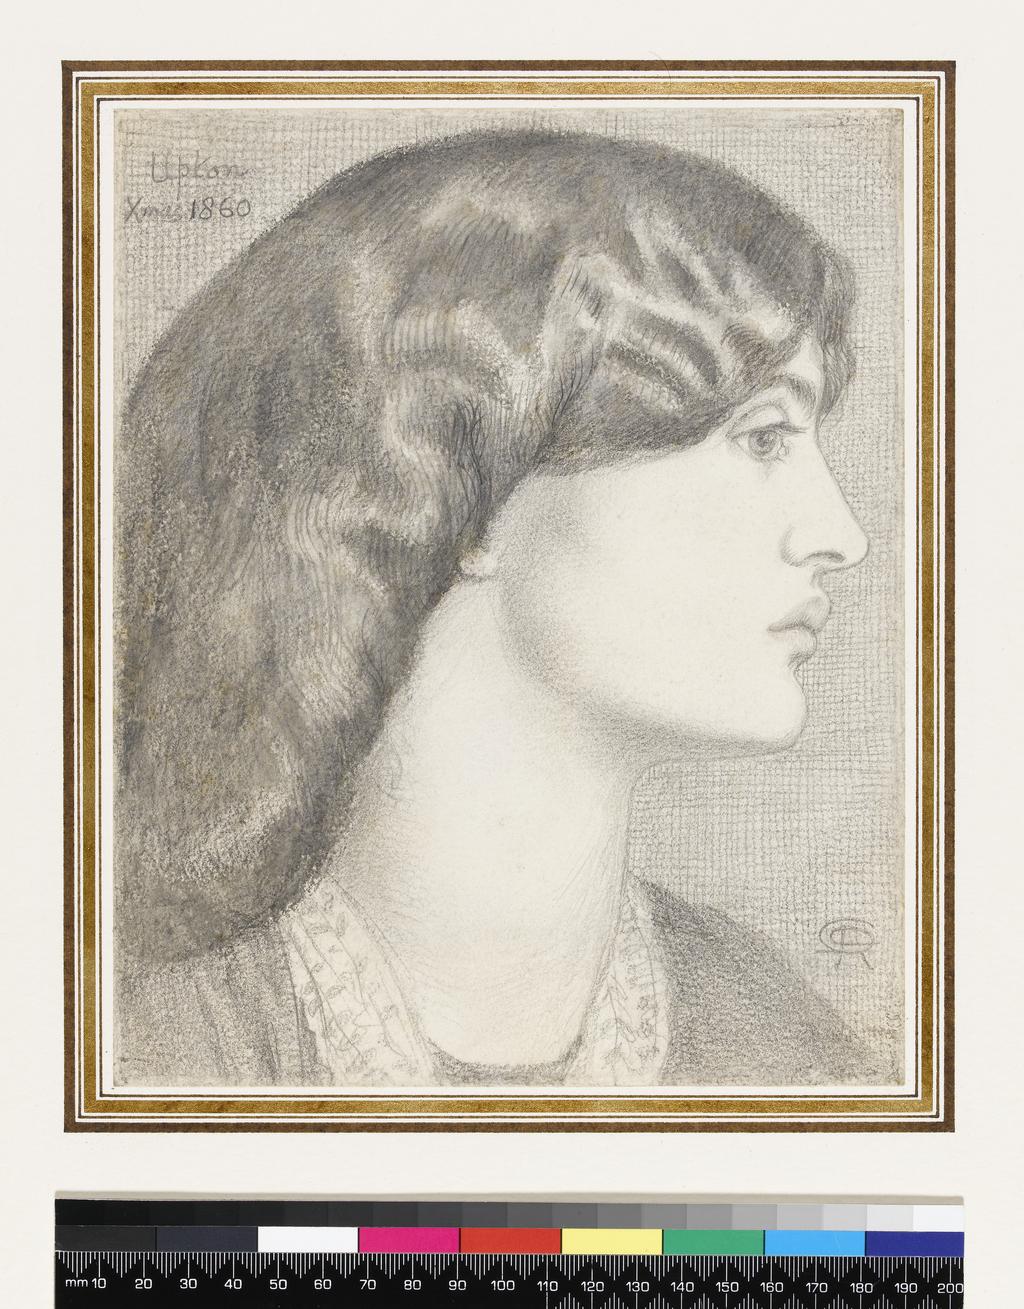 An image of Mrs. William Morris. Rossetti, Dante Gabriel (British, 1828-188). Graphite on paper, height 219 mm, width 178 mm, 1860.